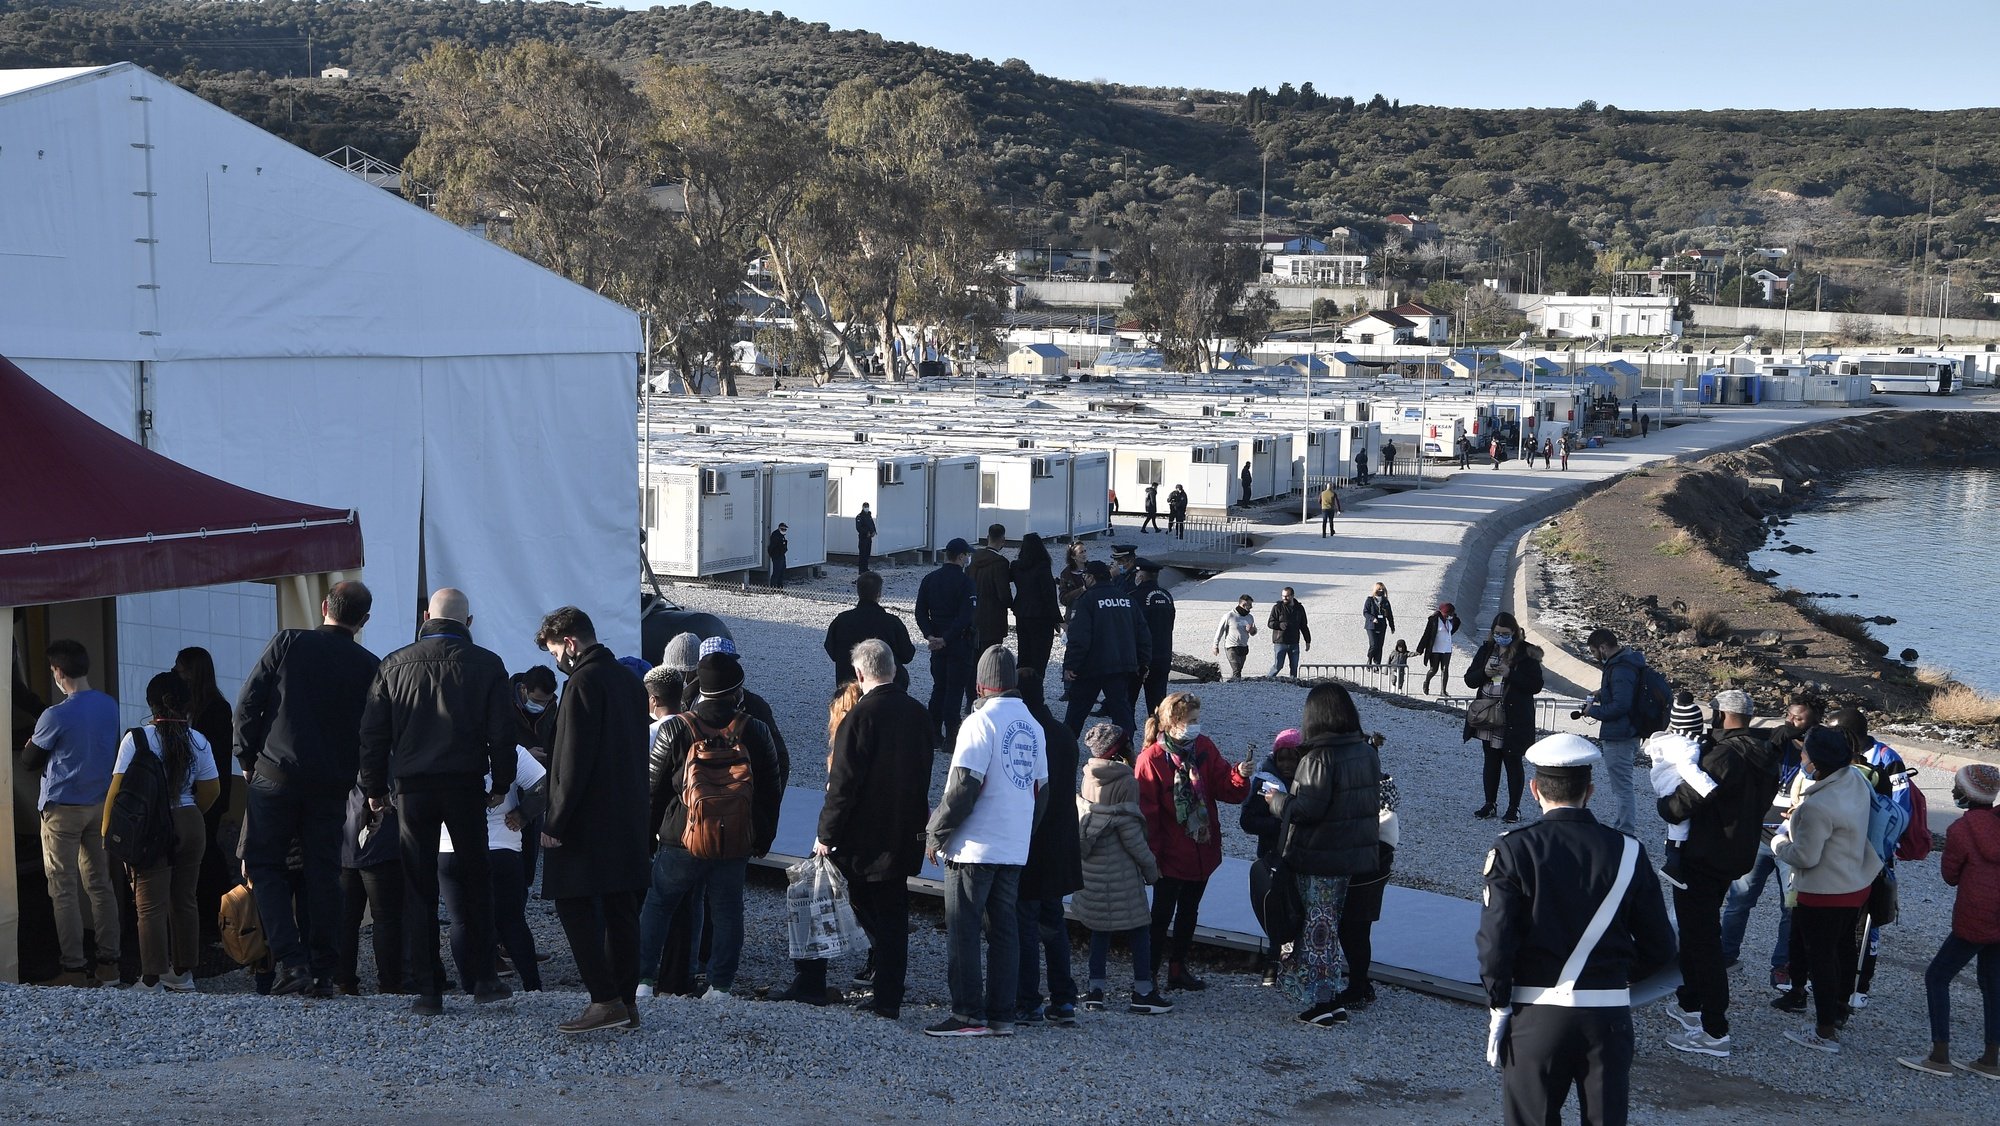 epa09623010 Refugees queue outside the Moria detention centre for migrants and refugees near Mytilene prior the meeting with Pope Francis on the island of Lesbos, Greece 05 December  2021. Pope Francis returns to the island of Lesbos, the migration flashpoint he first visited in 2016, to plead for better treatment of refugees as attitudes towards immigrants harden across Europe.  EPA/LOUISA GOULIAMAKI / POOL